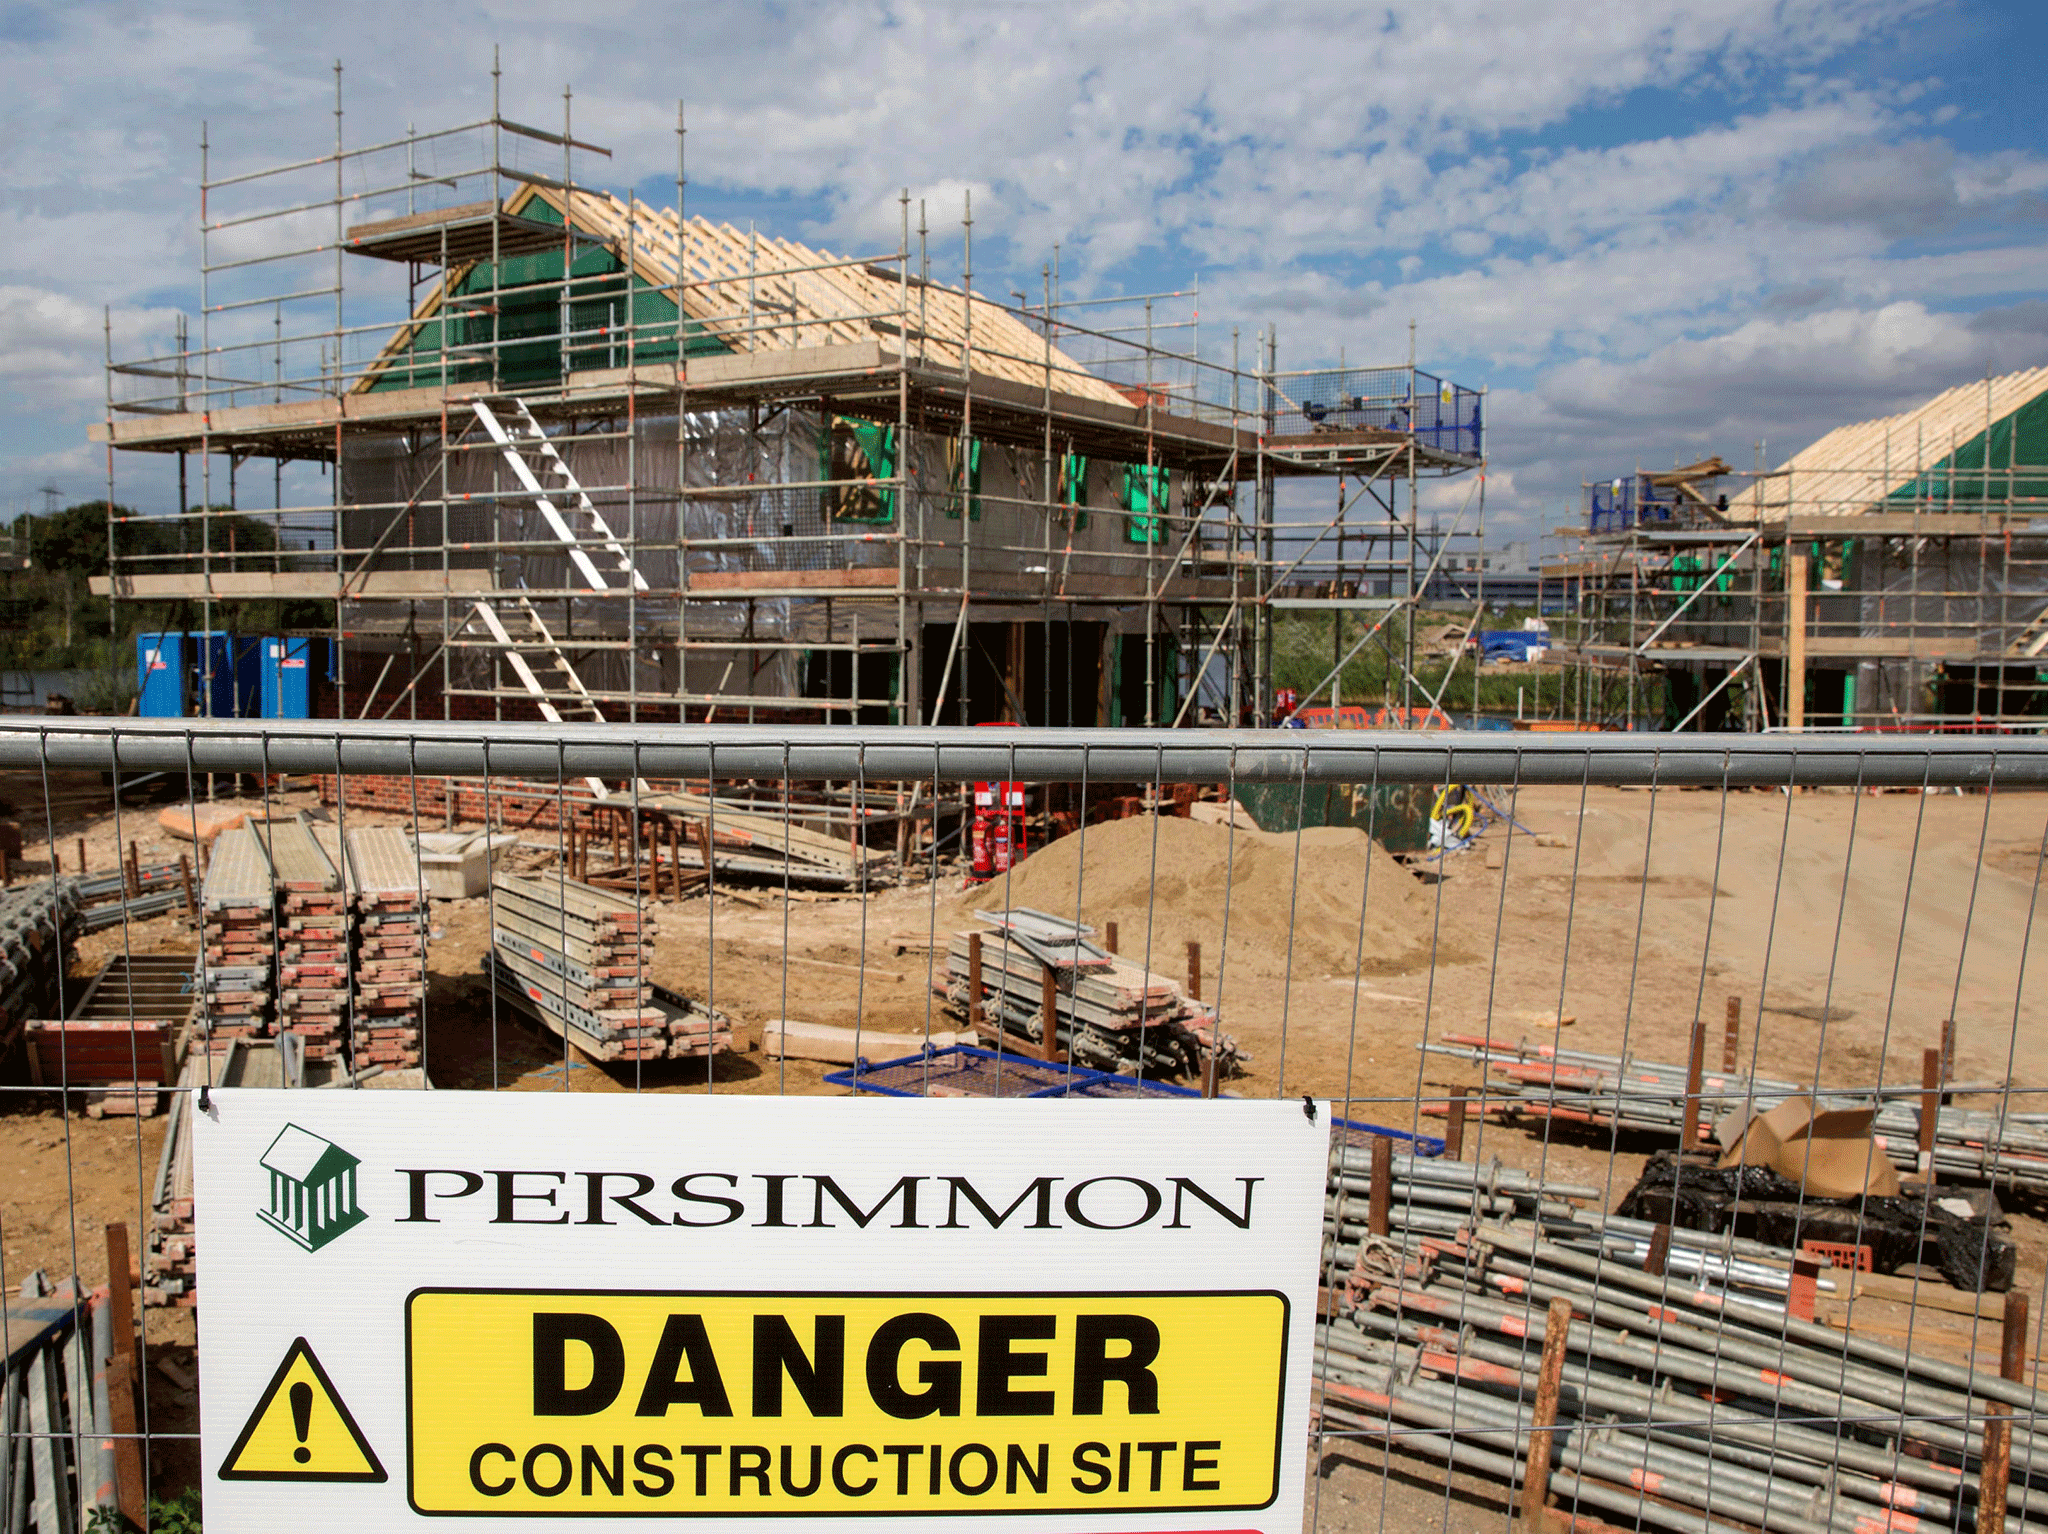 A Persimmon construction site